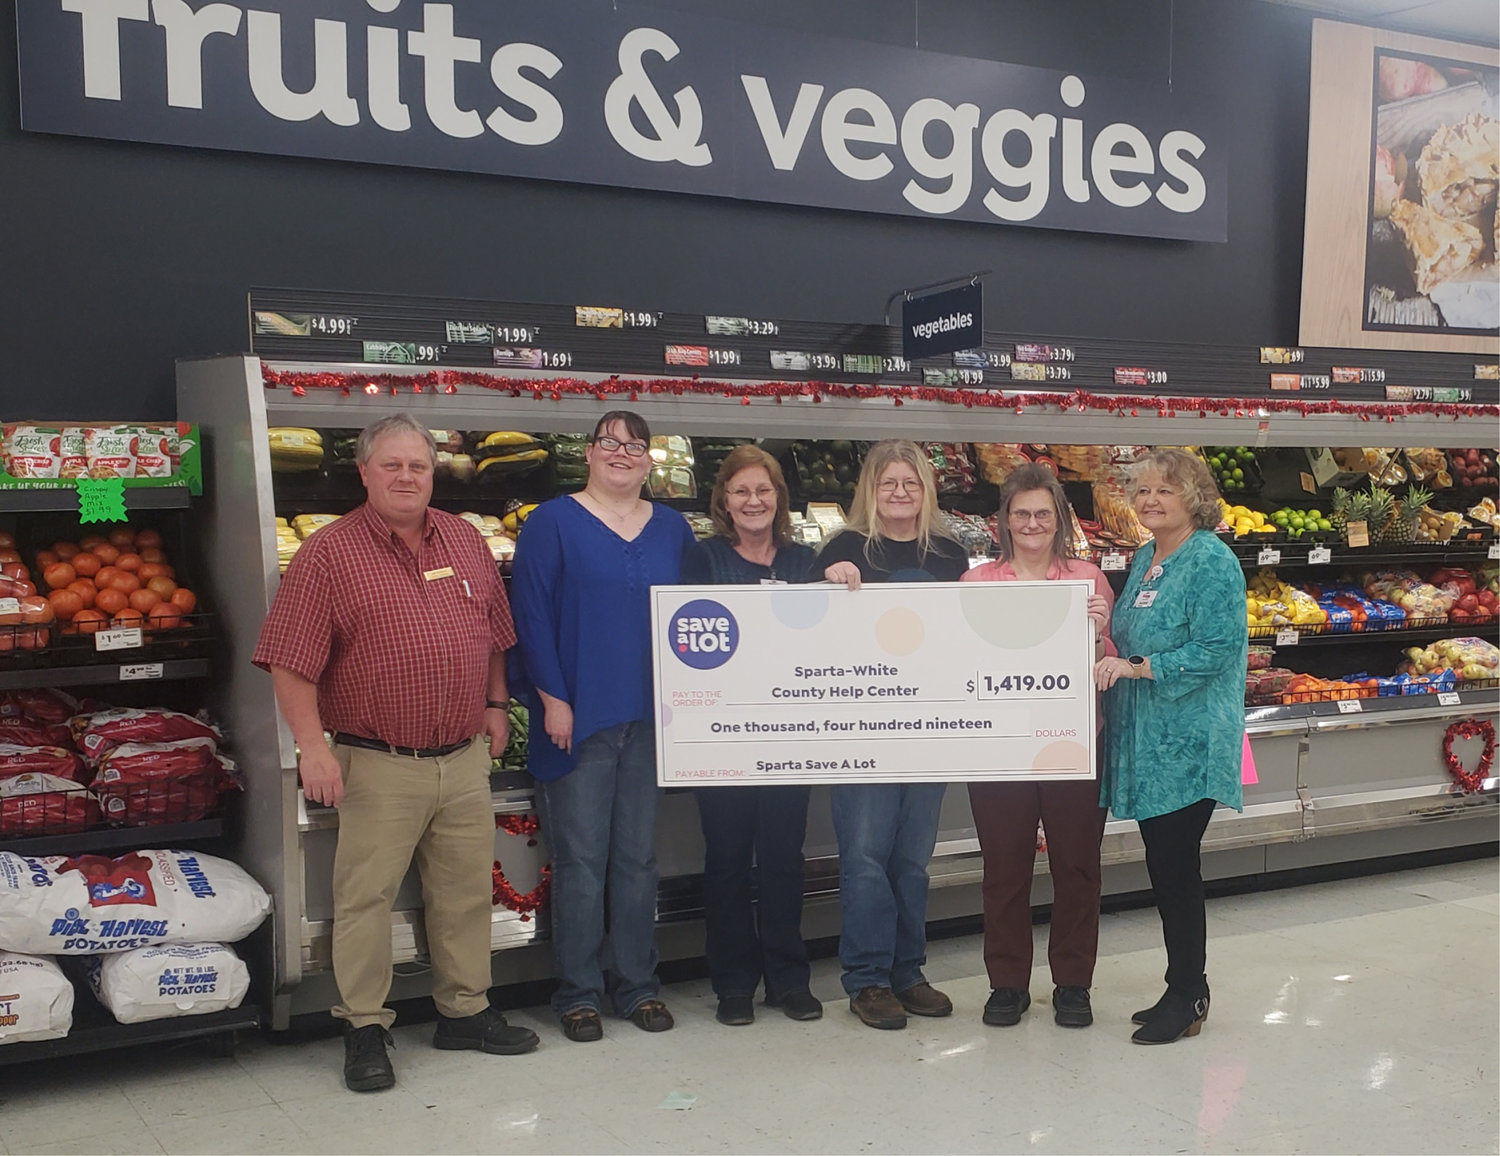 L-R:  District Manager Jeff Ashford, Store manager Sabrina Gay, Assistant Manager Donna Measles, Sparta-White County Help Center representative Melissa Quinn, Manager Jackie Brock, Manager Vickie Young